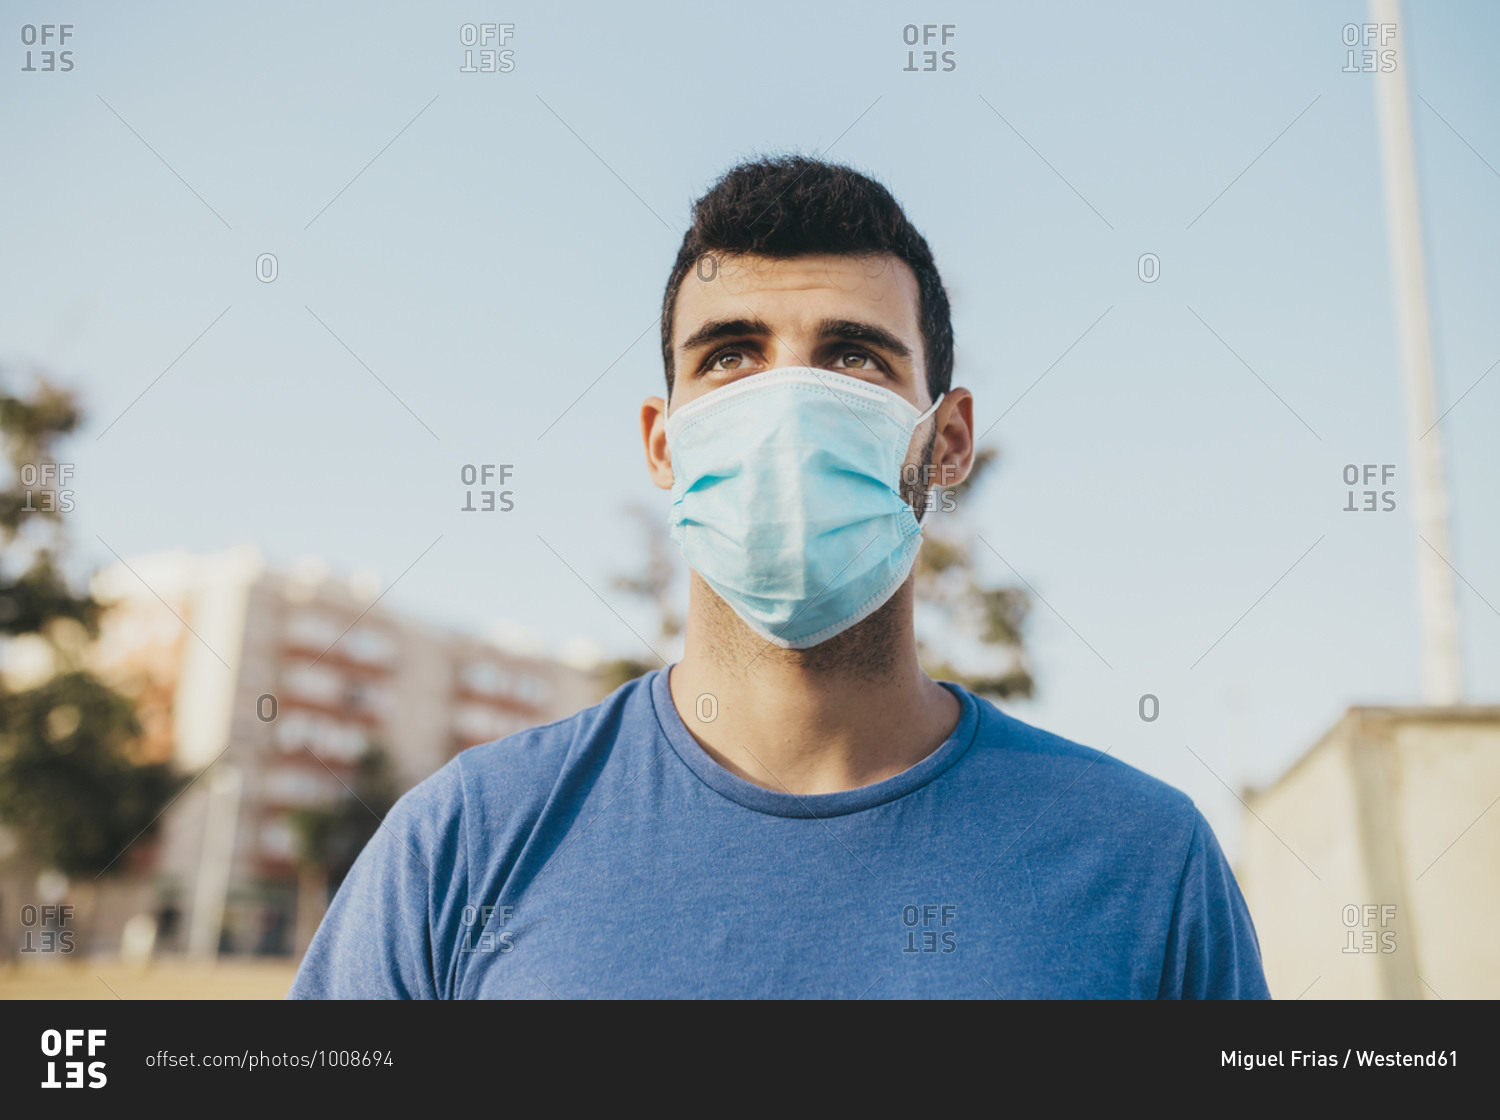 Close-up of thoughtful young man wearing mask against clear sky in city